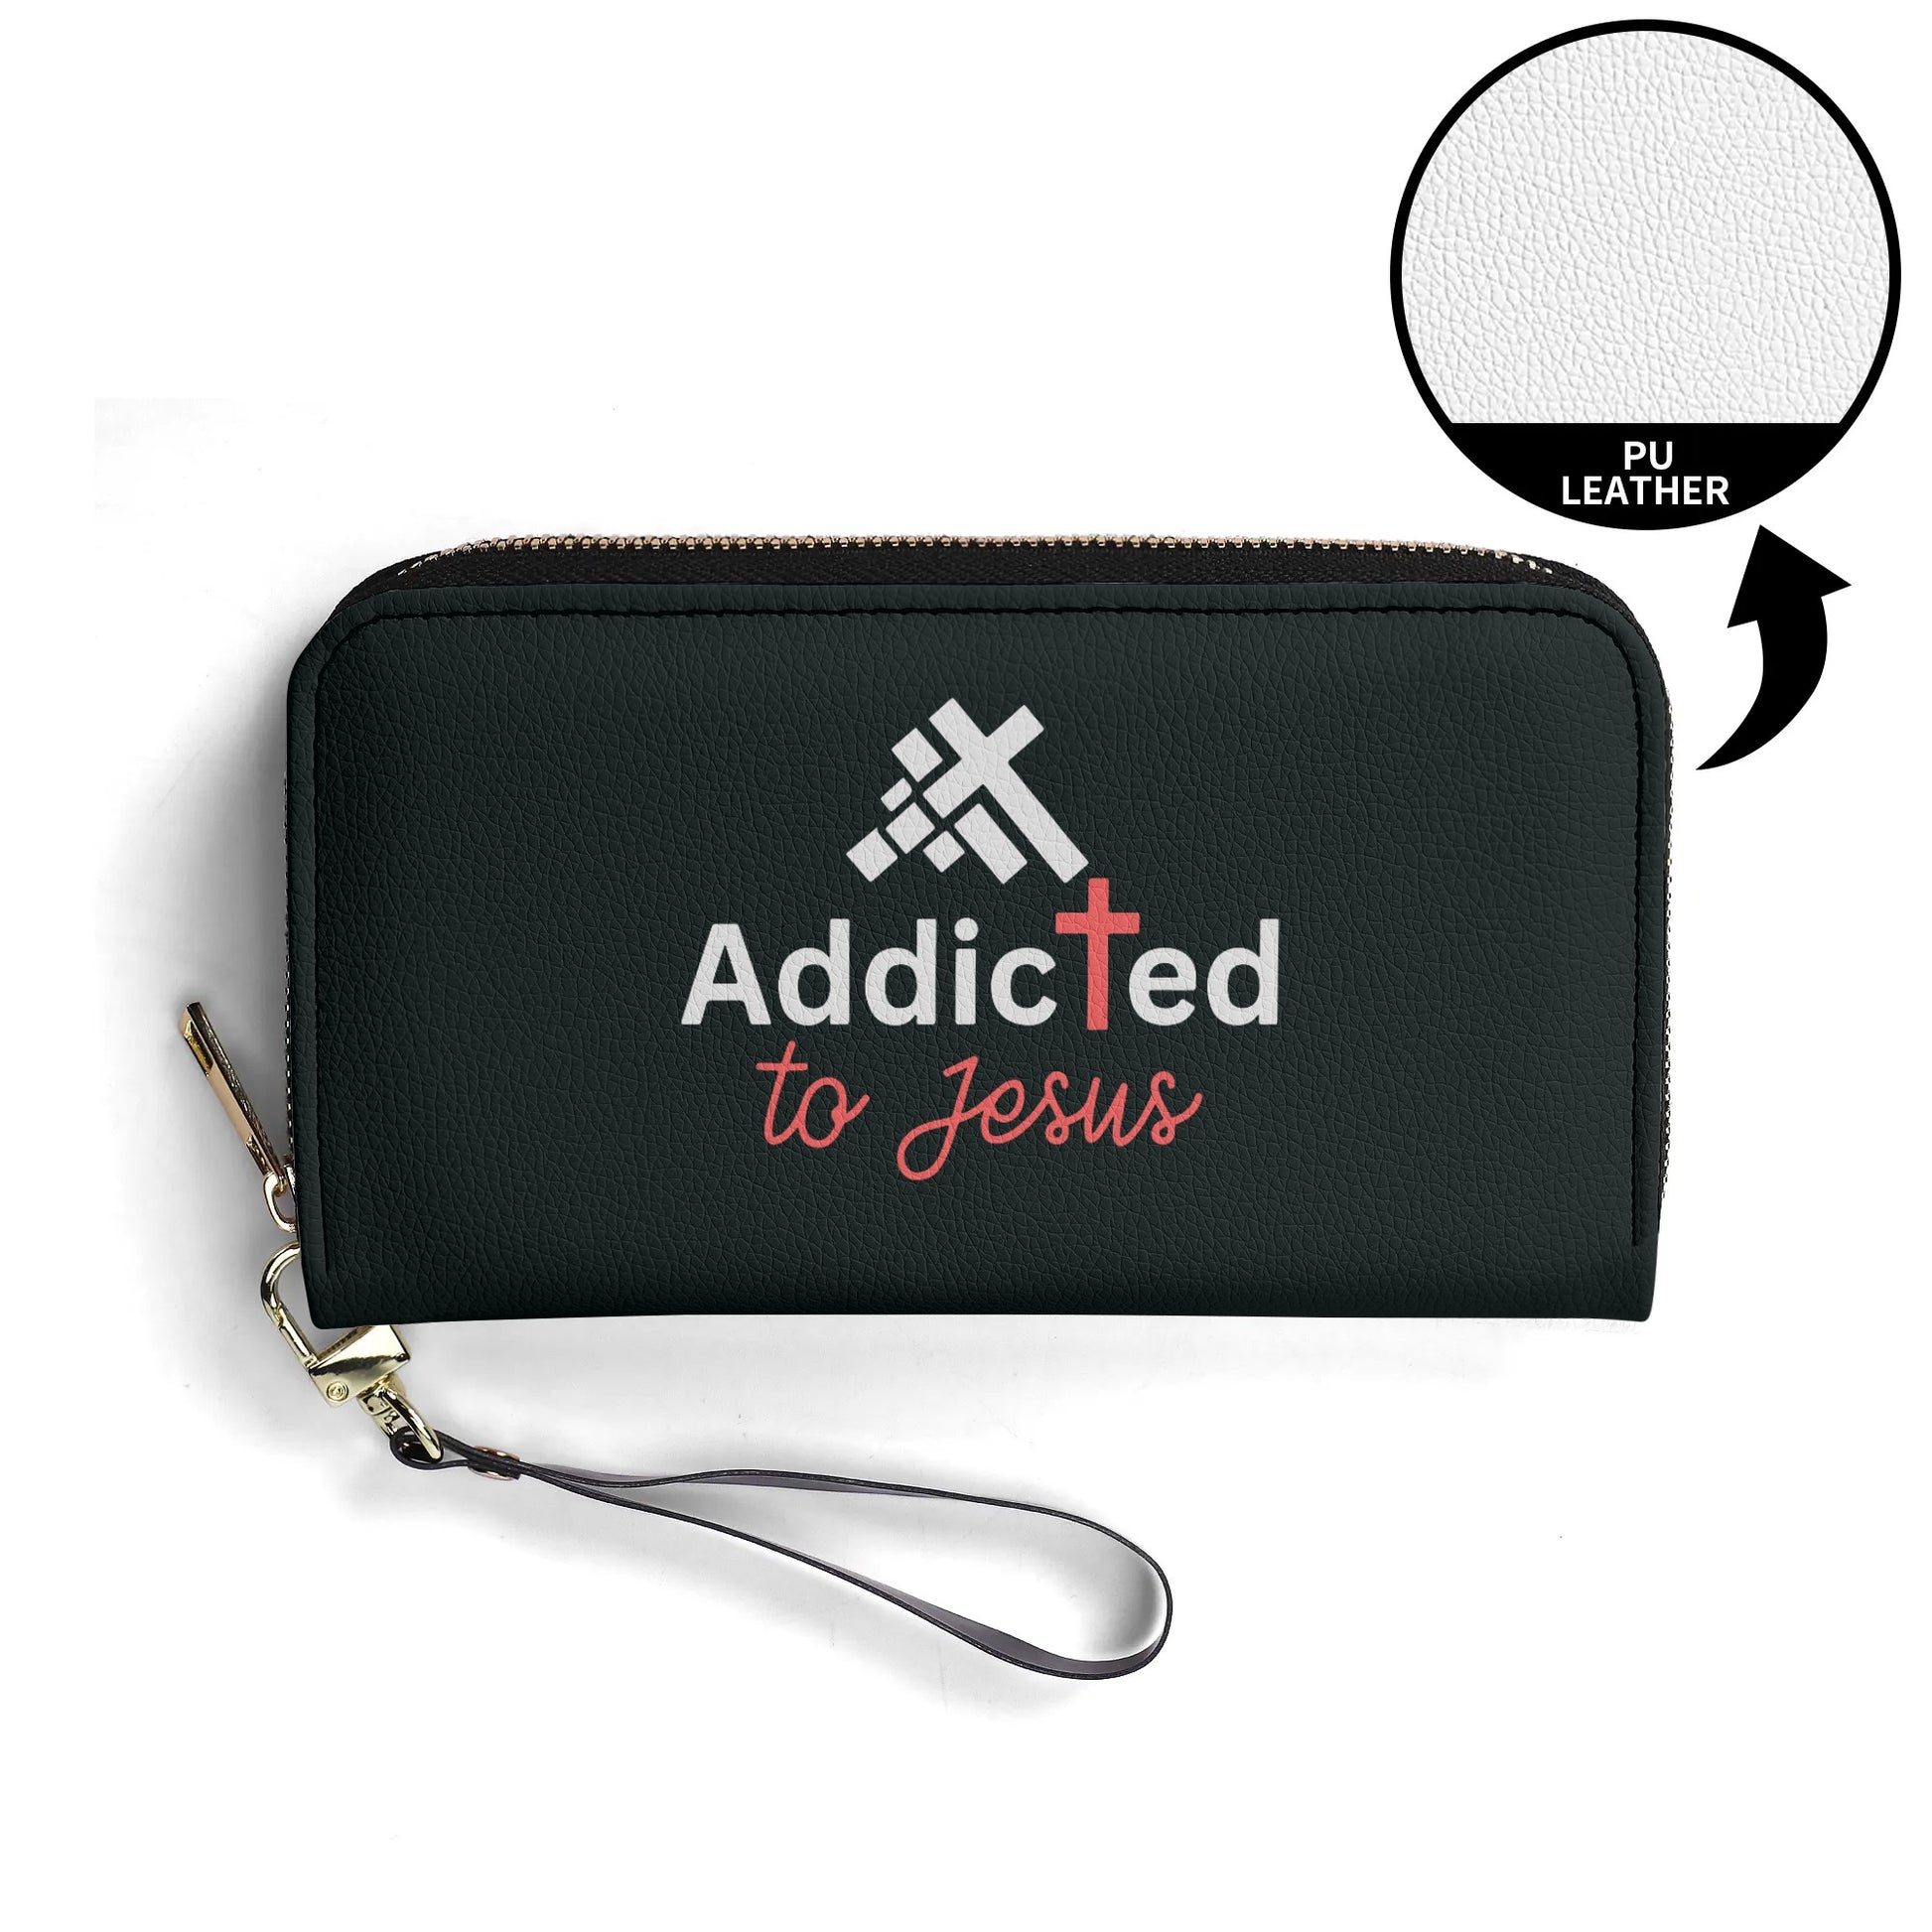 Addicted To Jesus PU Leather Womens Christian Wallet popcustoms